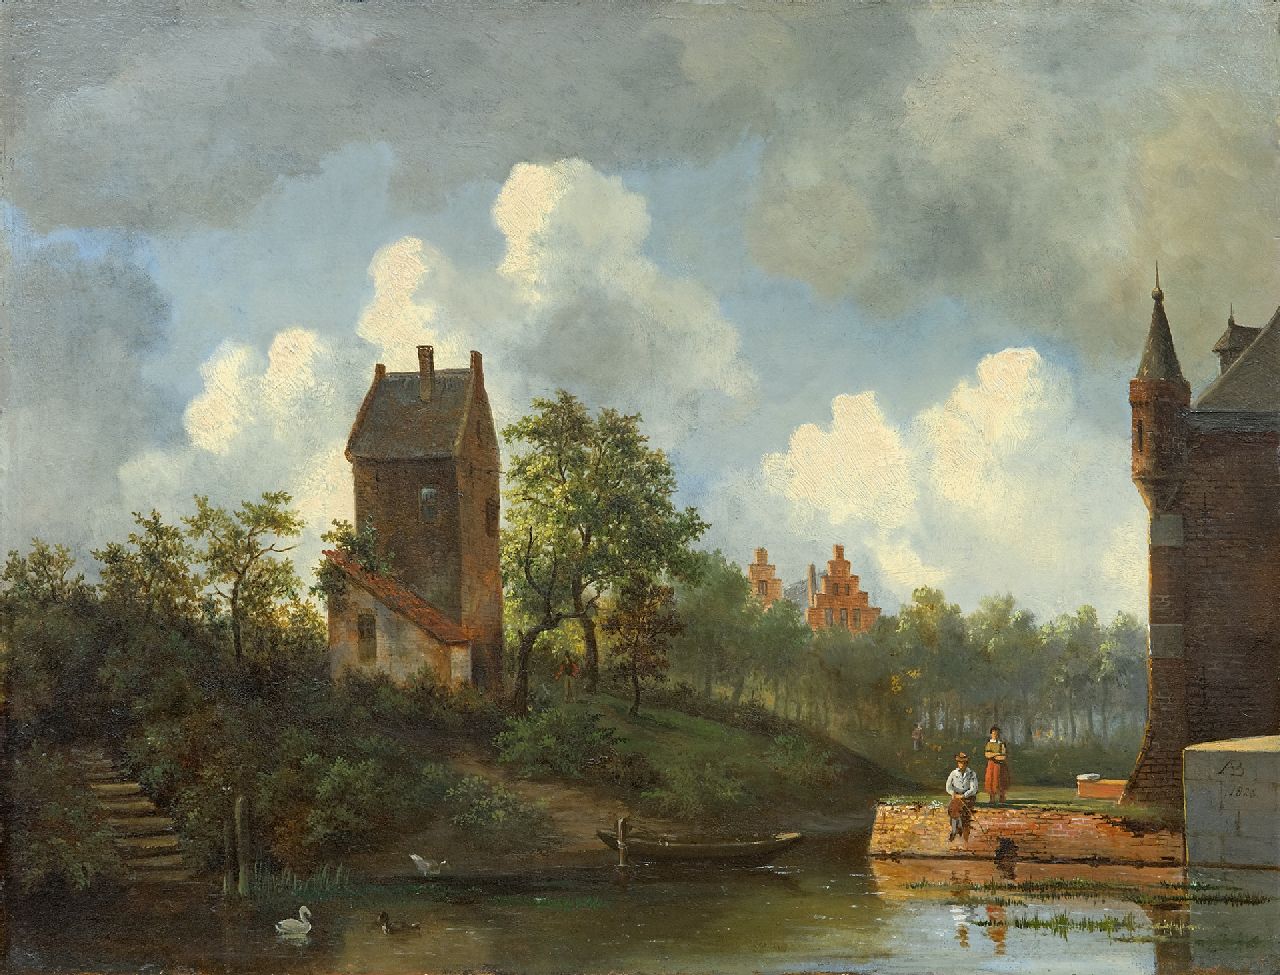 Albertus Brondgeest | Angler by a moat, oil on panel, 34.5 x 45.0 cm, signed l.r. with monogram and dated 1826